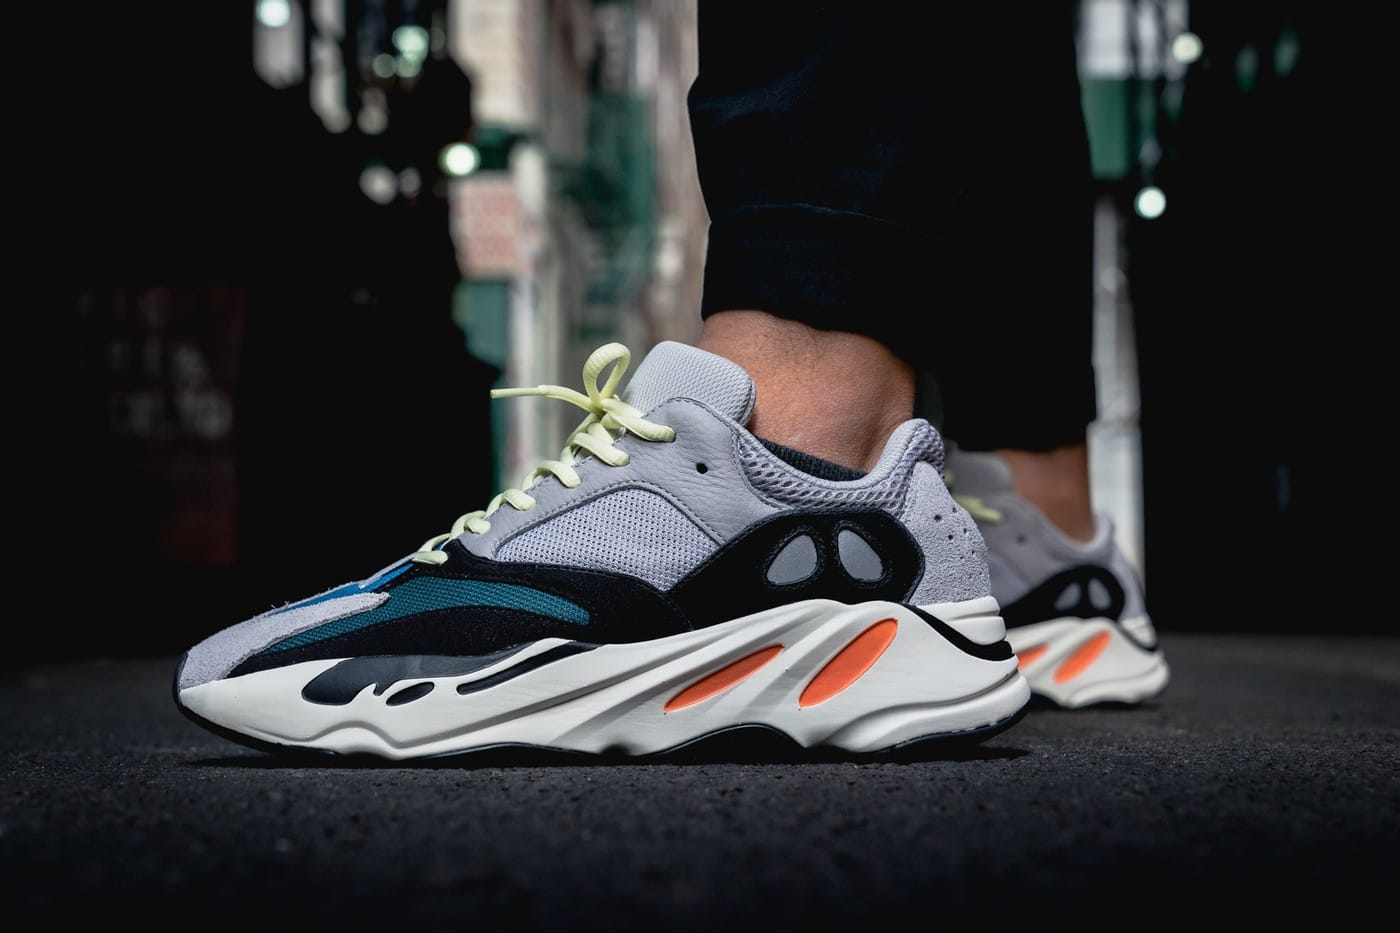 Adidas Yeezy 700 Release Date Flash Sales, 60% OFF 